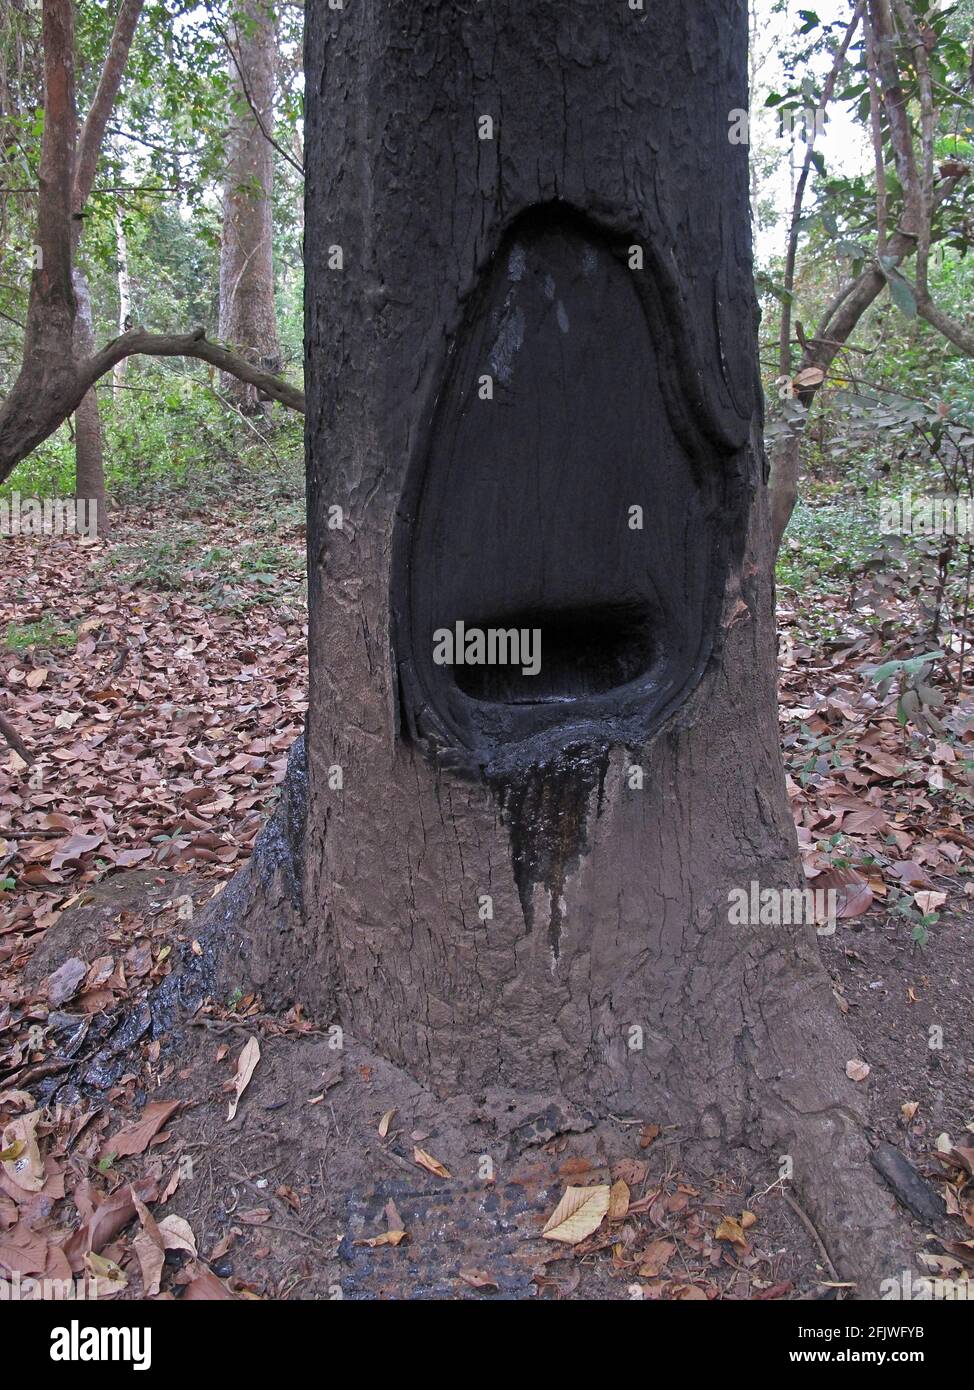 fire hole cut into Dipterocarpus alatus tree trunk for 'burning out' the resin which is used as a wood varnish Prey Veng, Cambodia             January Stock Photo